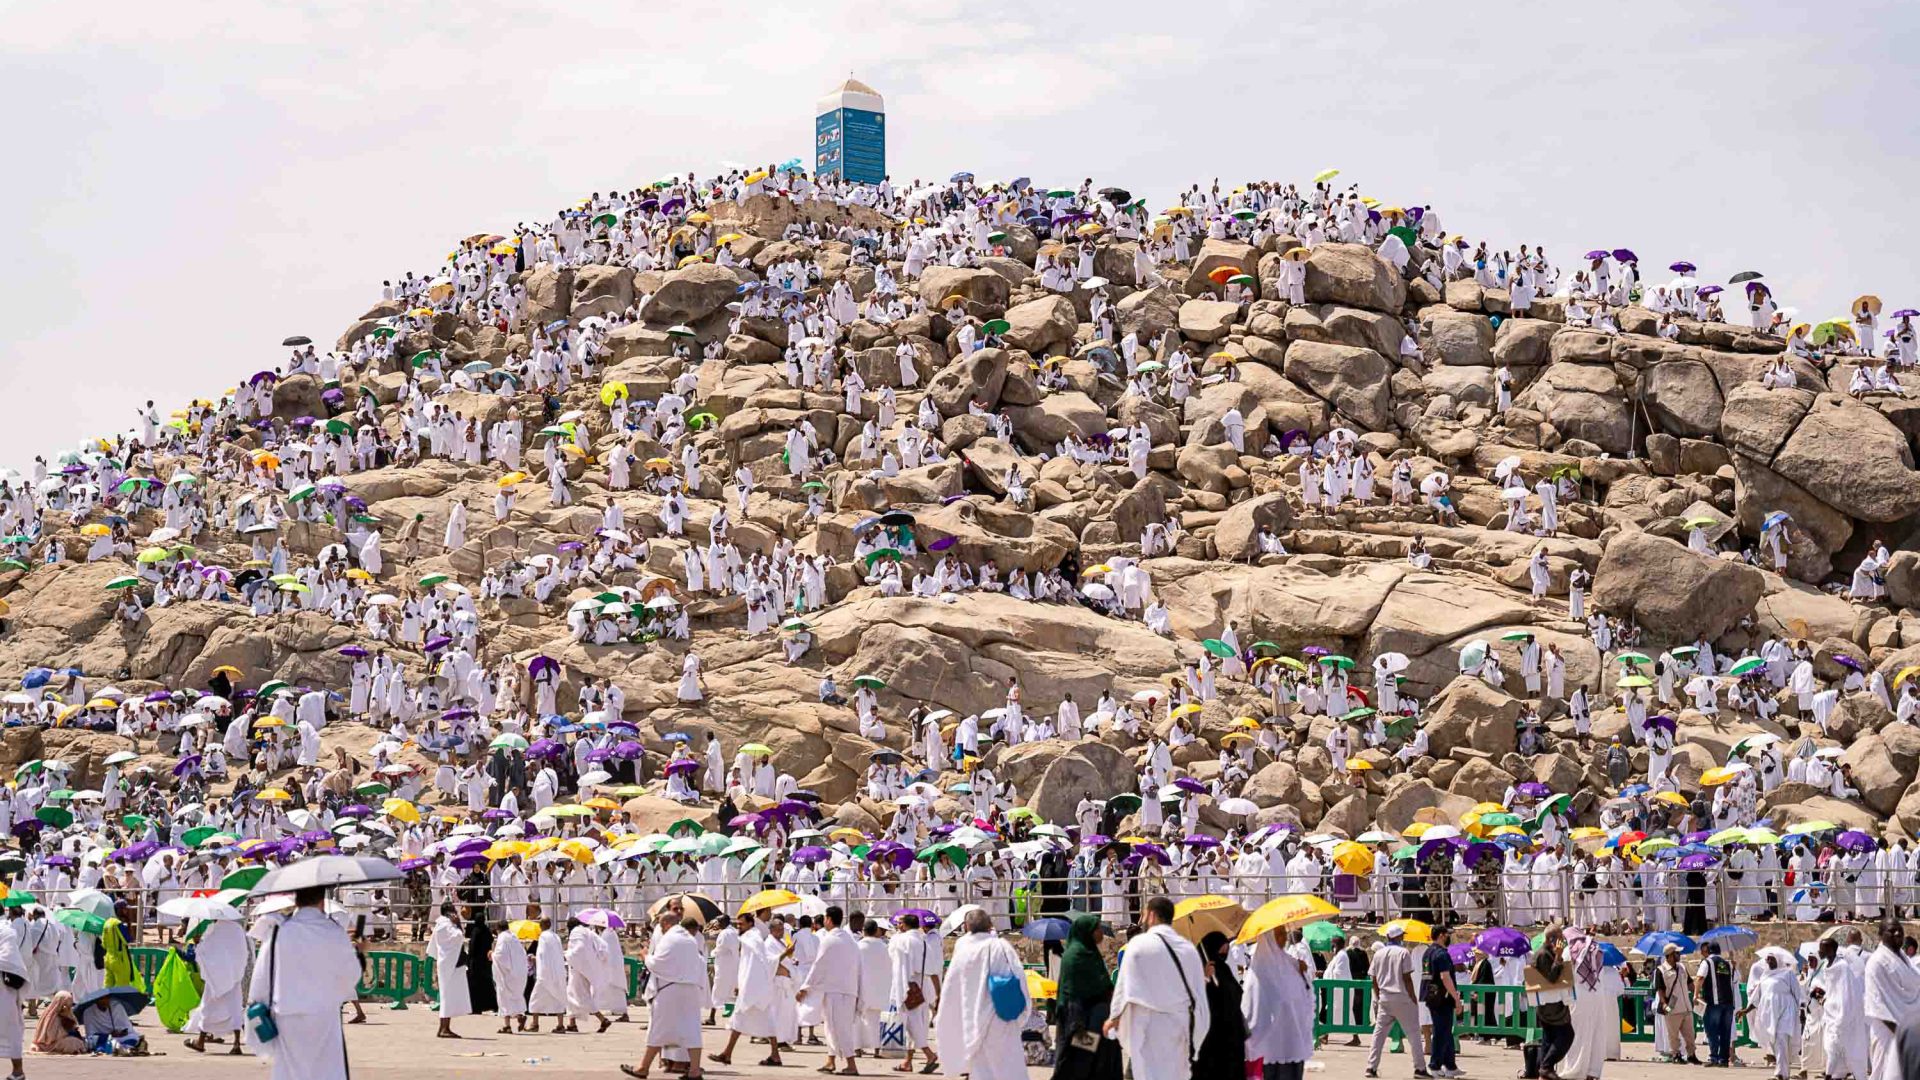 Hundreds of people in white ascend a mountain.